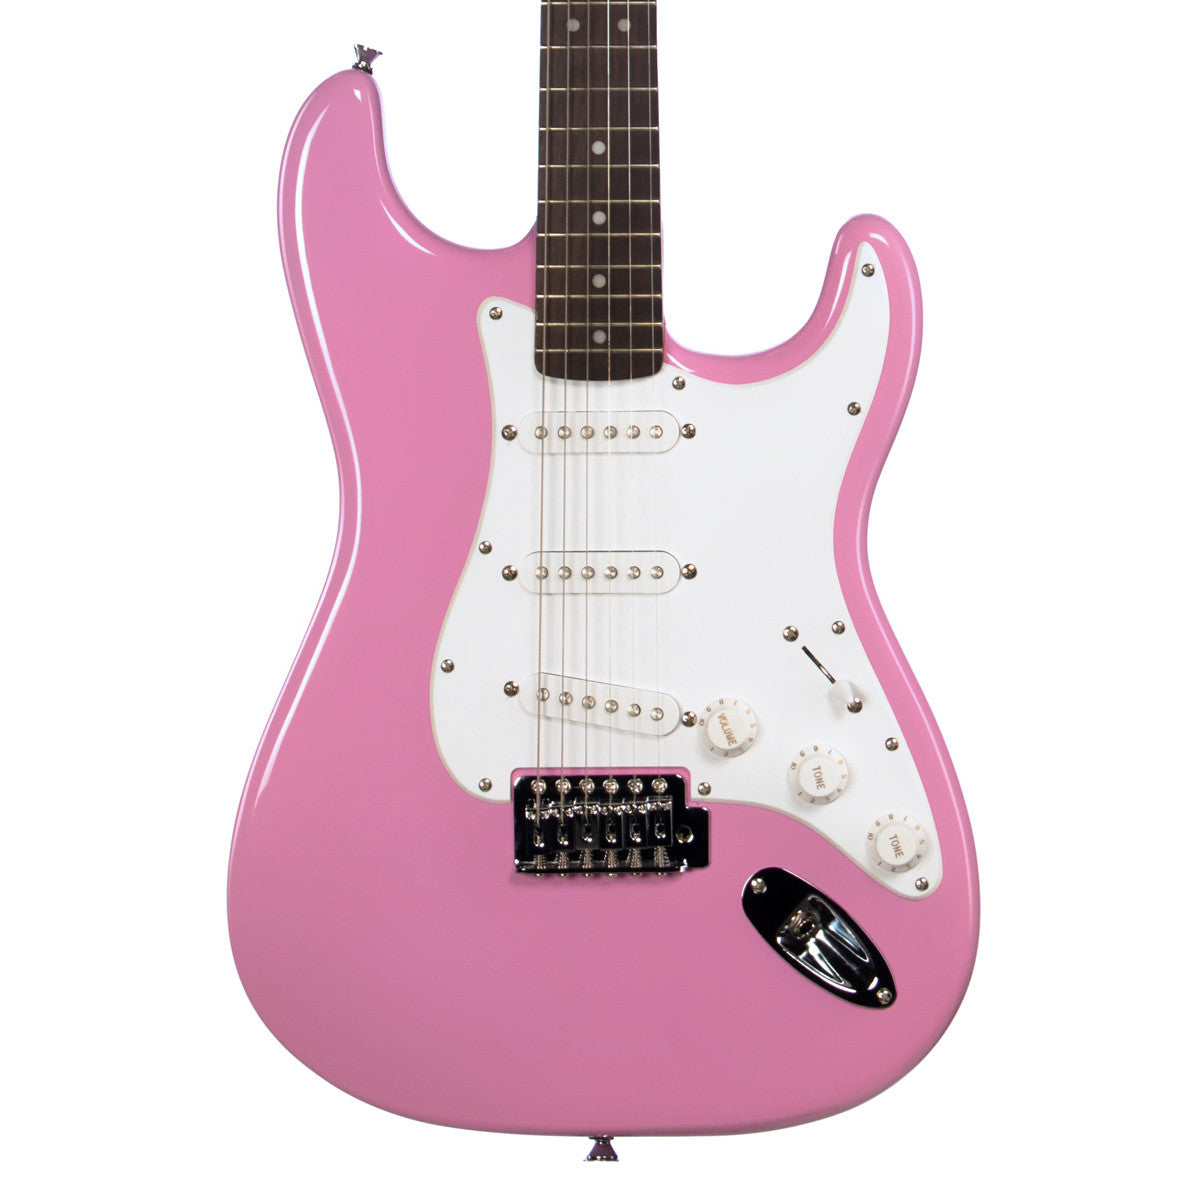 Squier Bullet Strat with Tremolo | Make'n Music